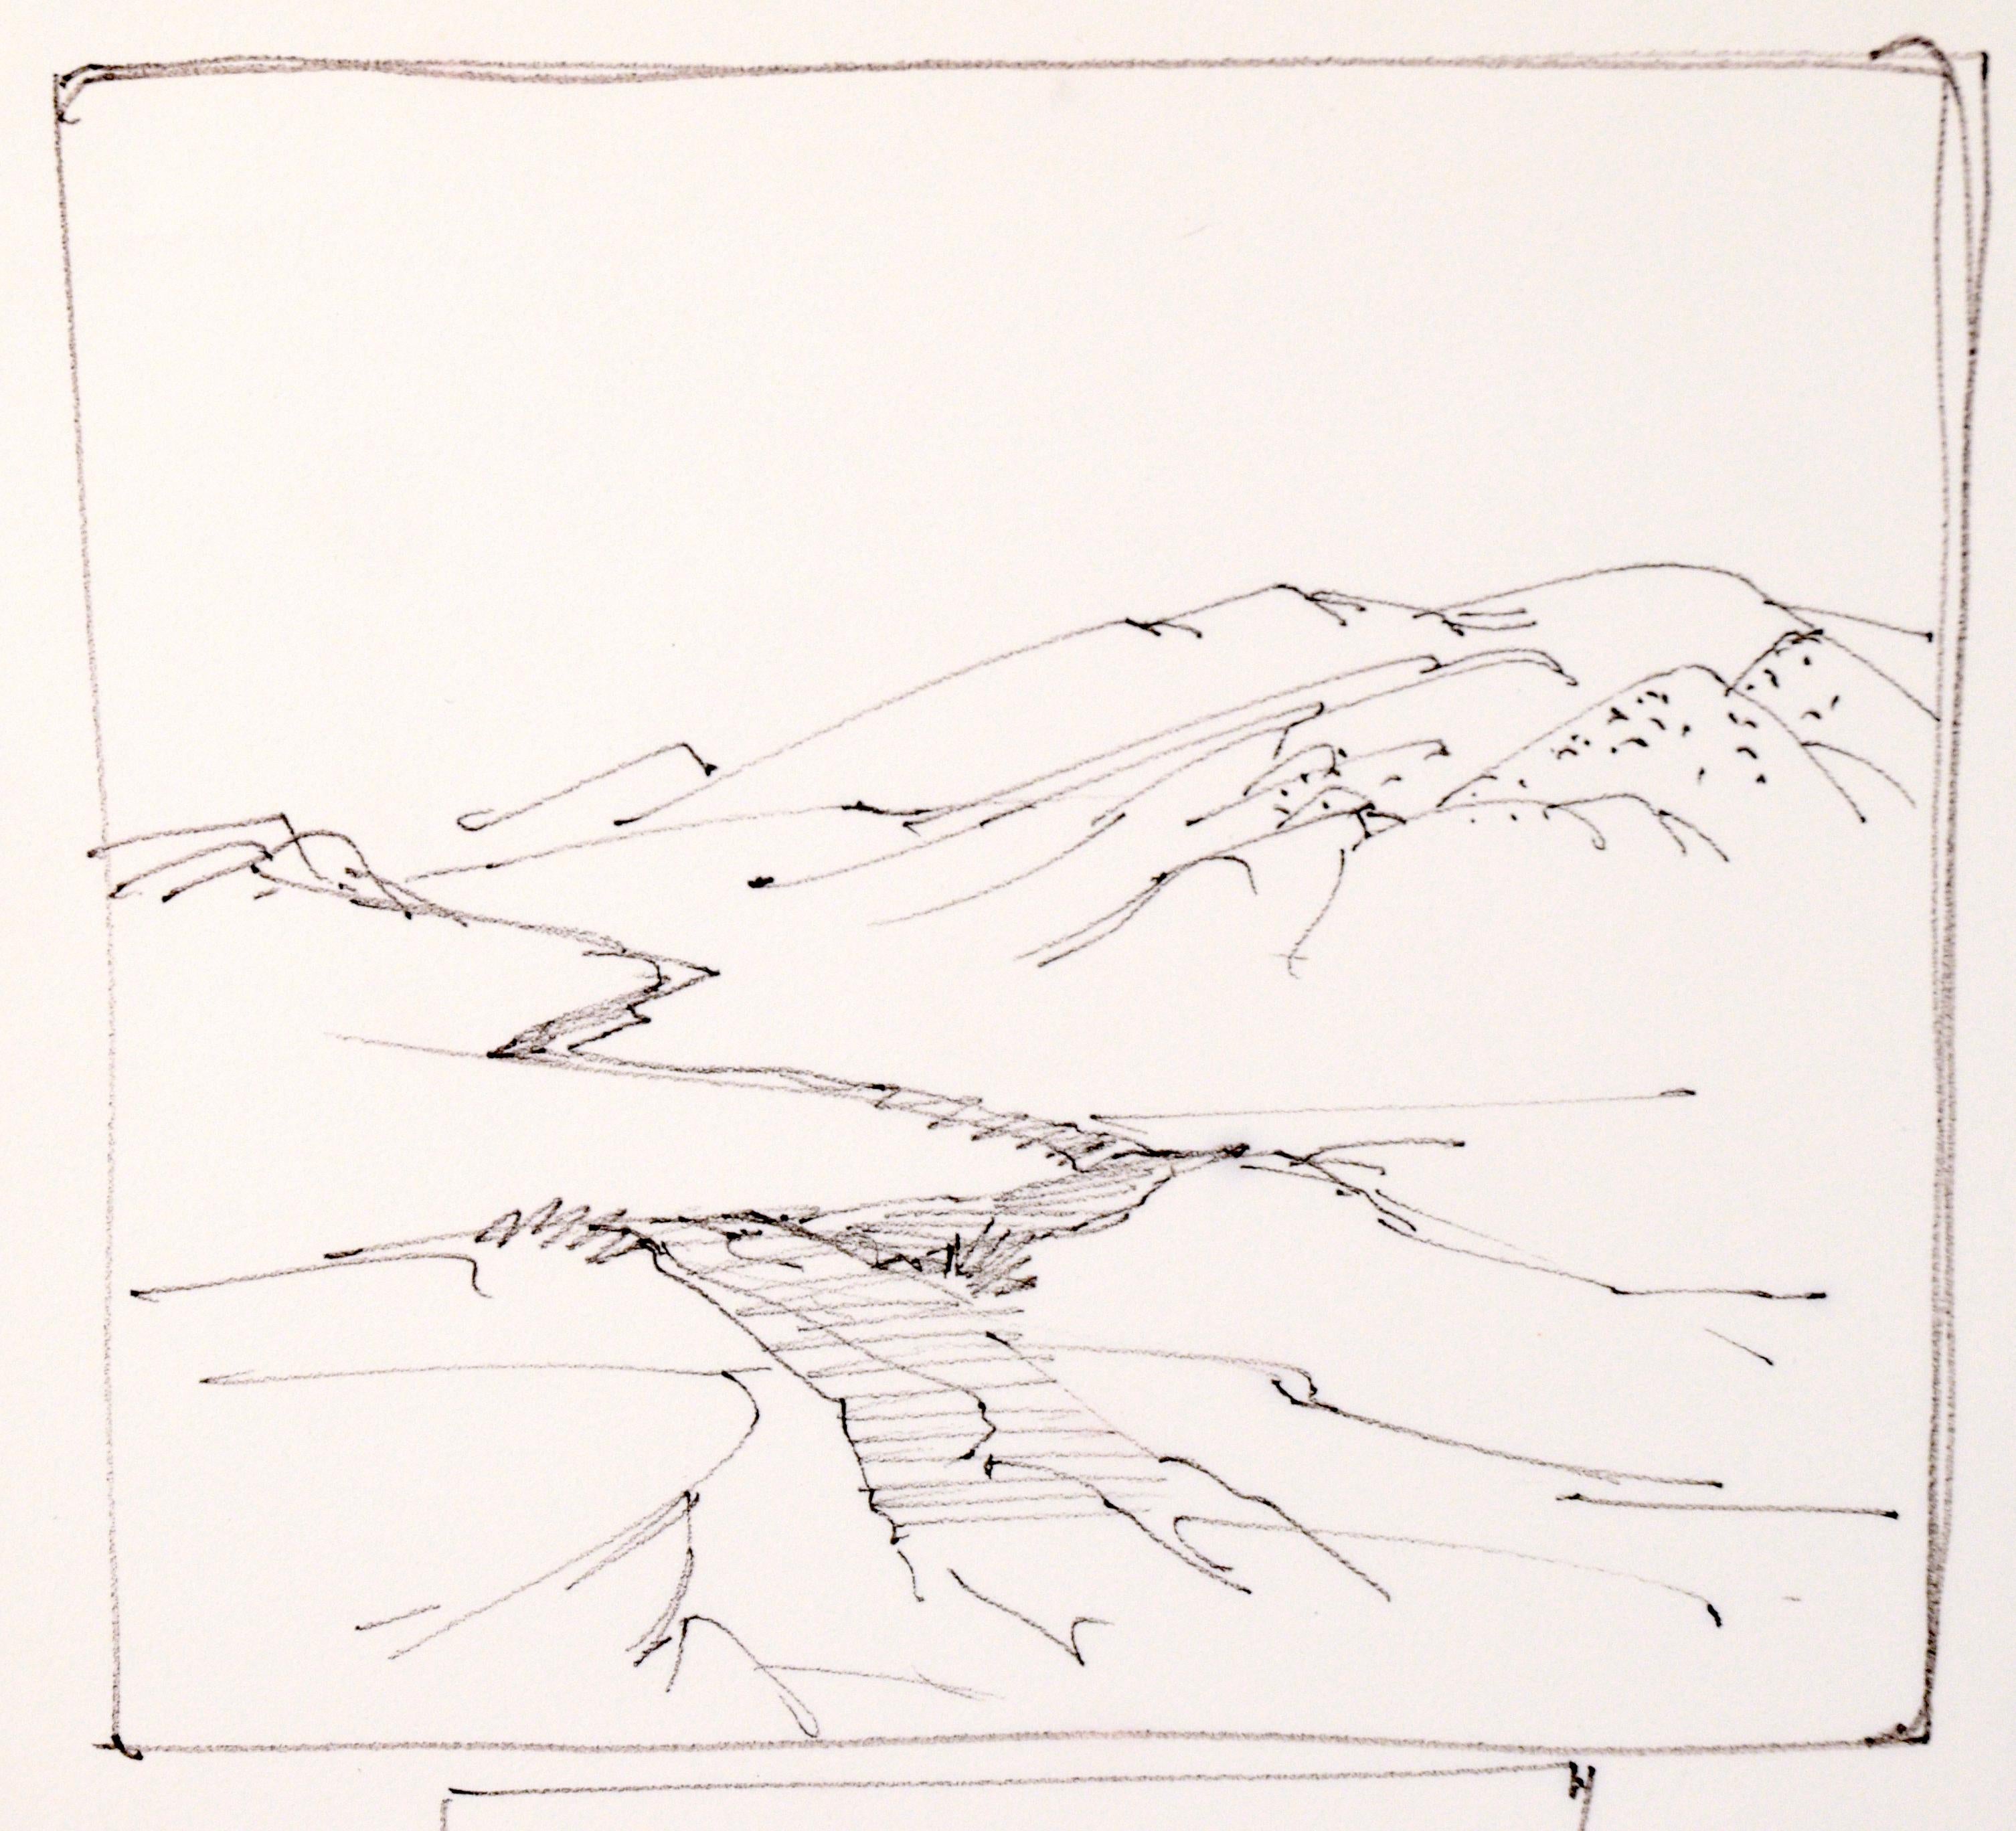 Four-Panel Thumbnail Sketches of Desert and Canyon Landscapes in Ink on Paper - Art by Laurence Sisson